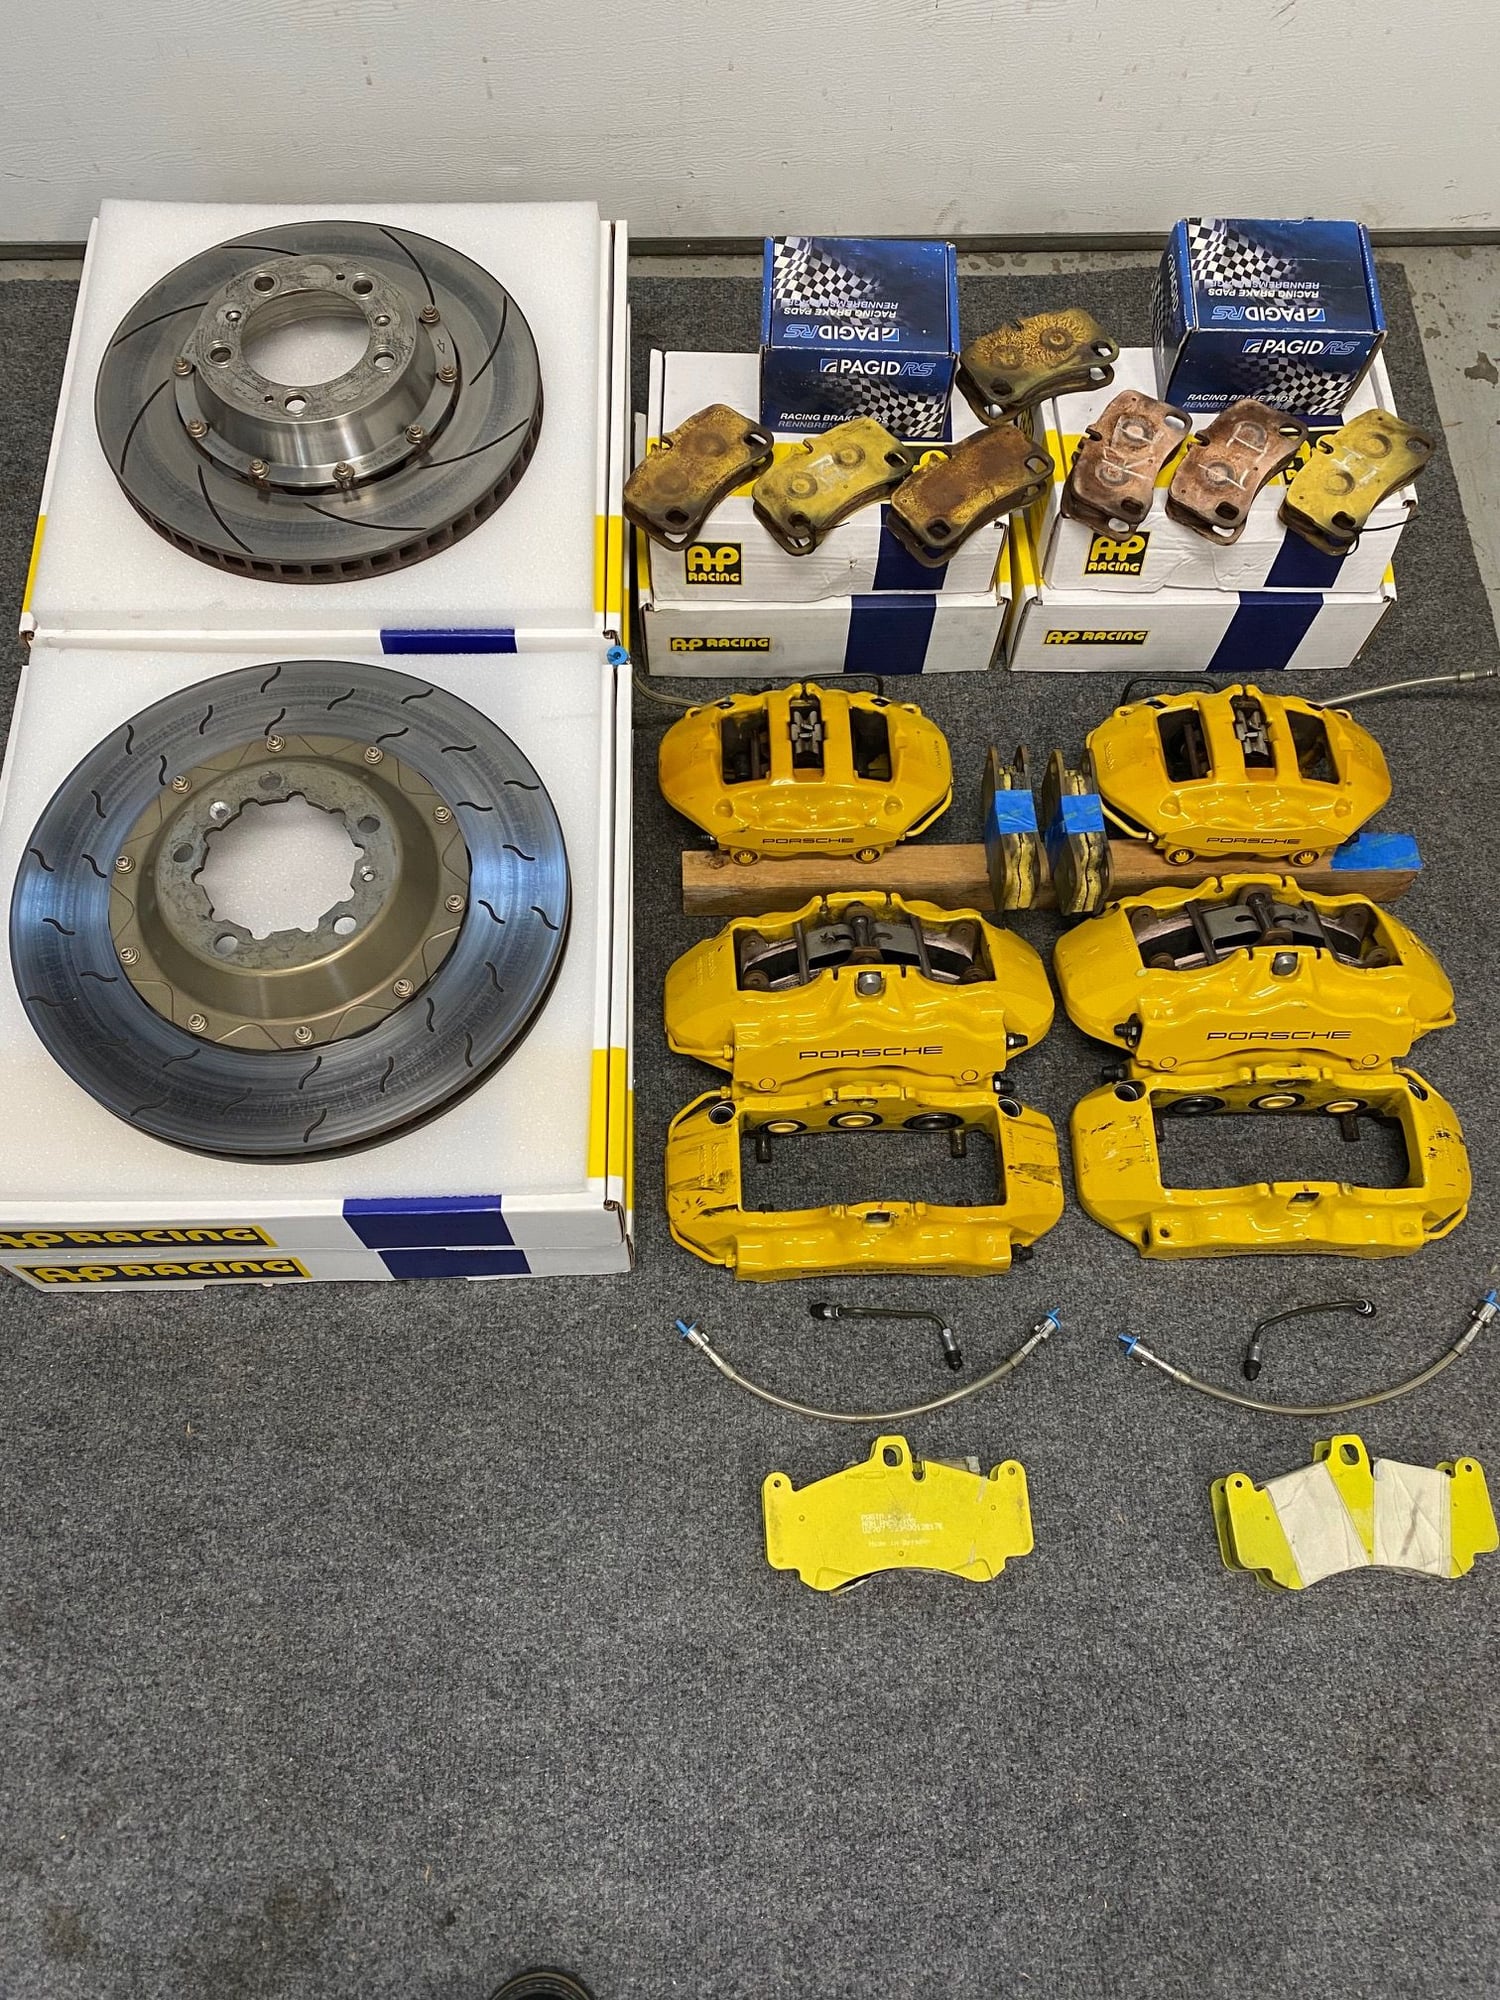 Brakes - PCCB to Steel Complete track set-up - Used - 2007 to 2012 Porsche 911 - San Jose, CA 95118, United States